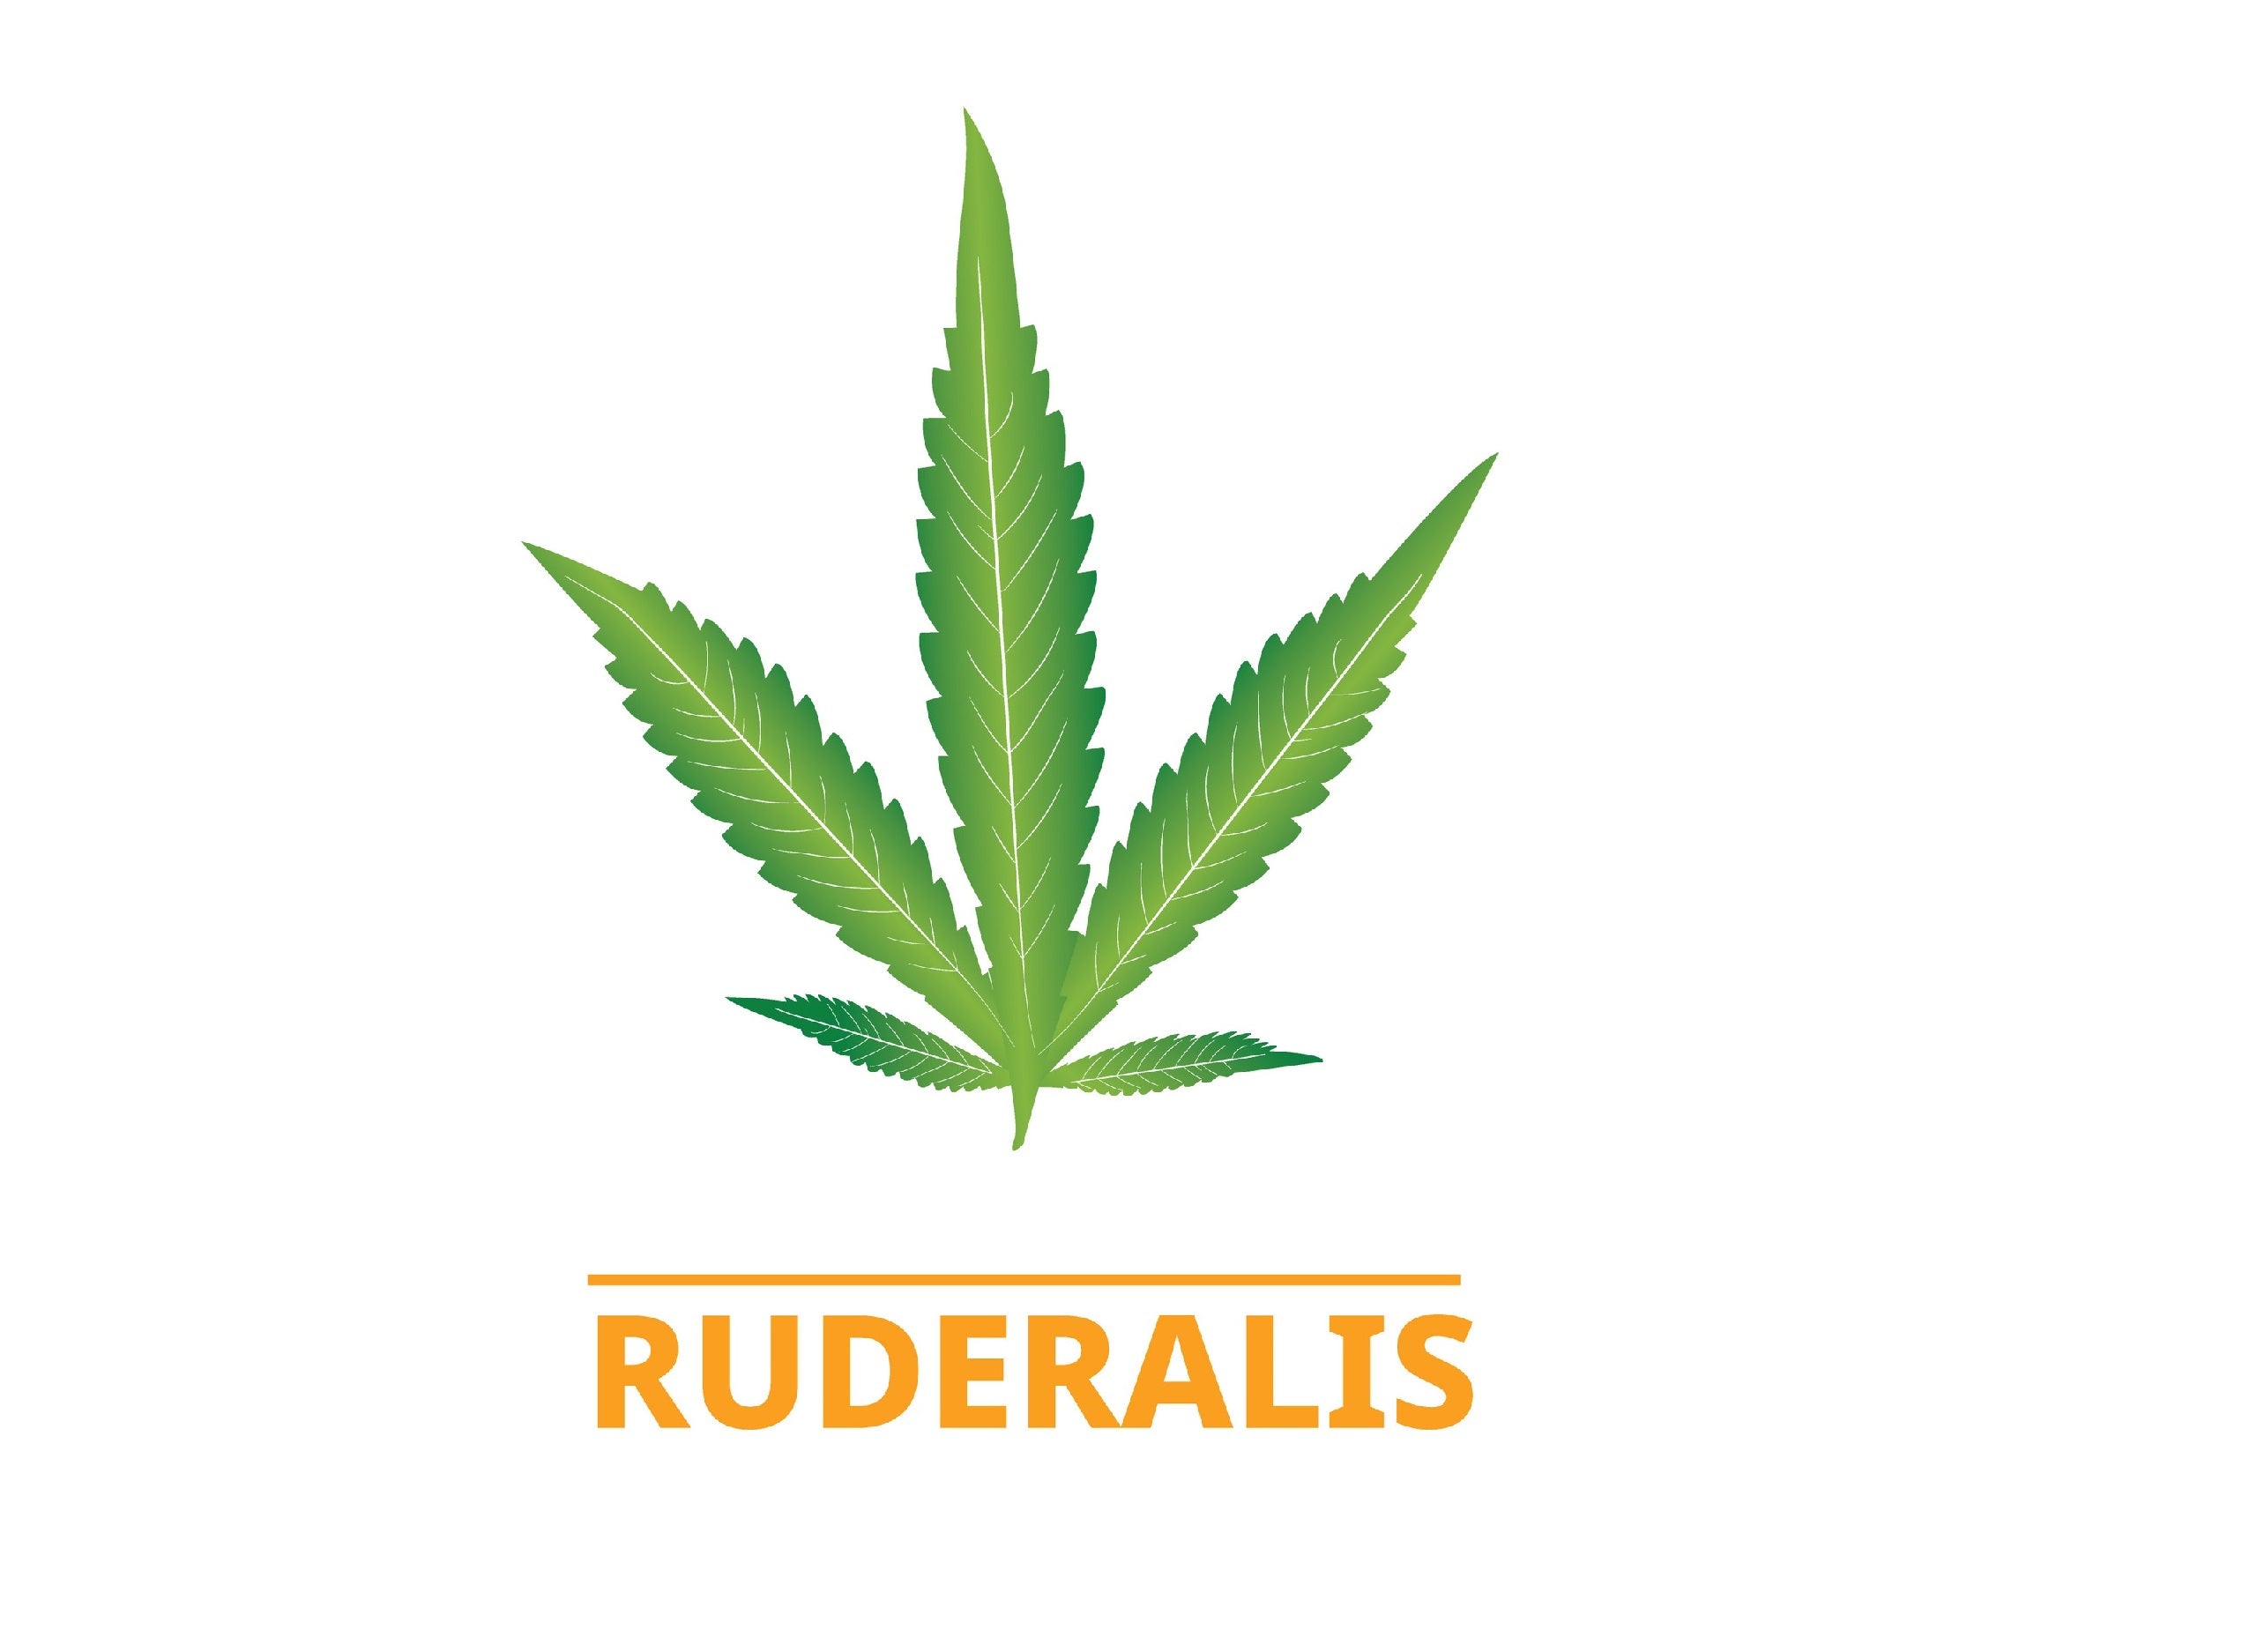 Cannabis Ruderalis: What Is It?